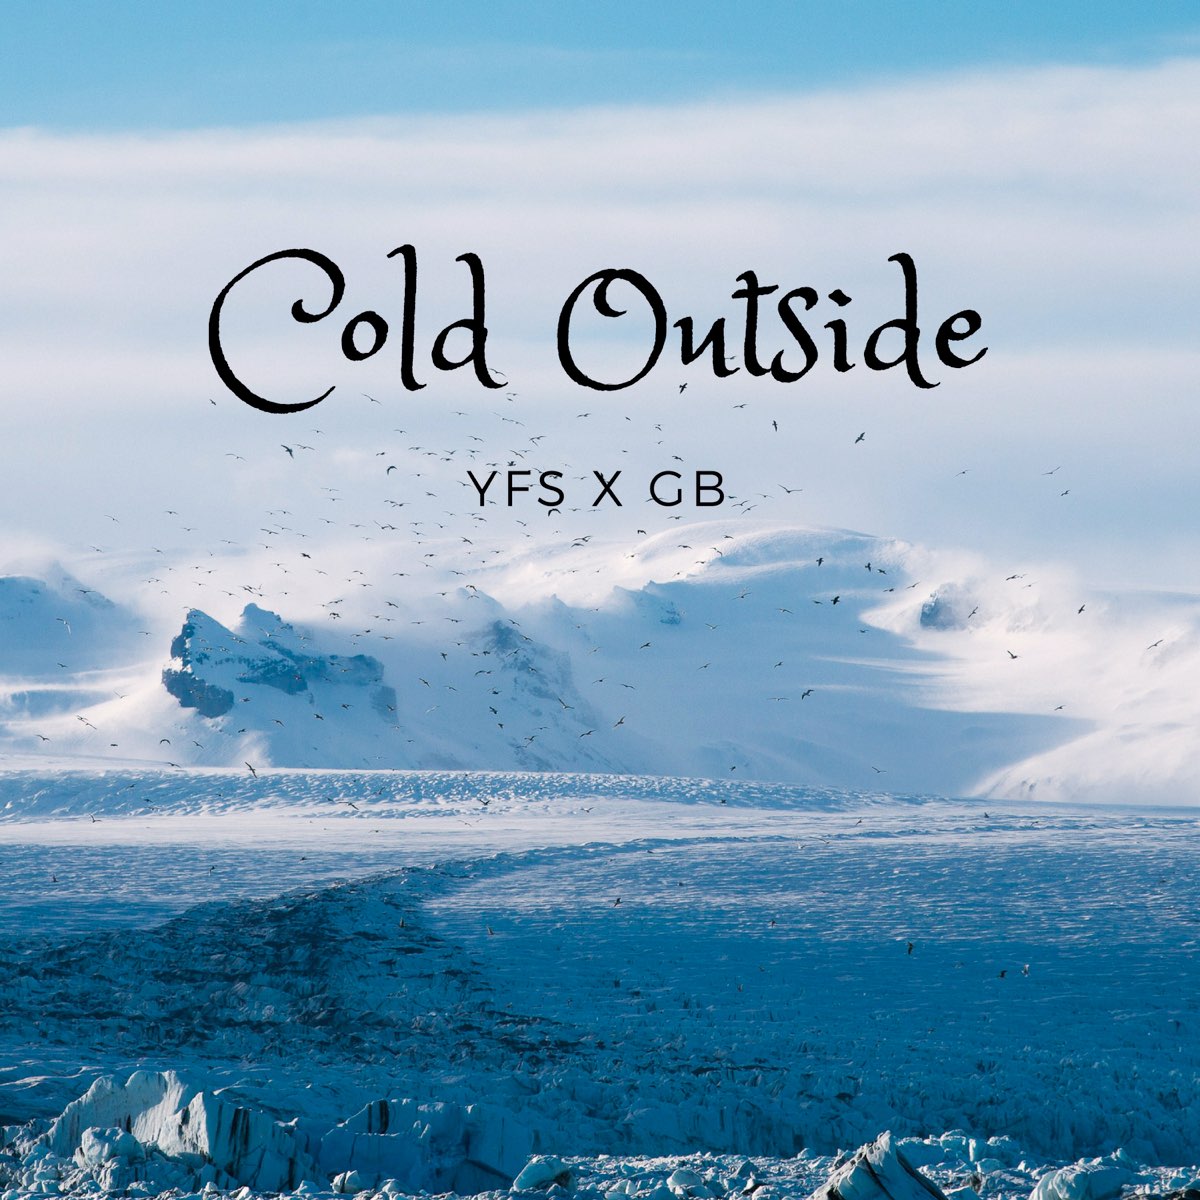 Cold music. Cold музыка. Cold outside.